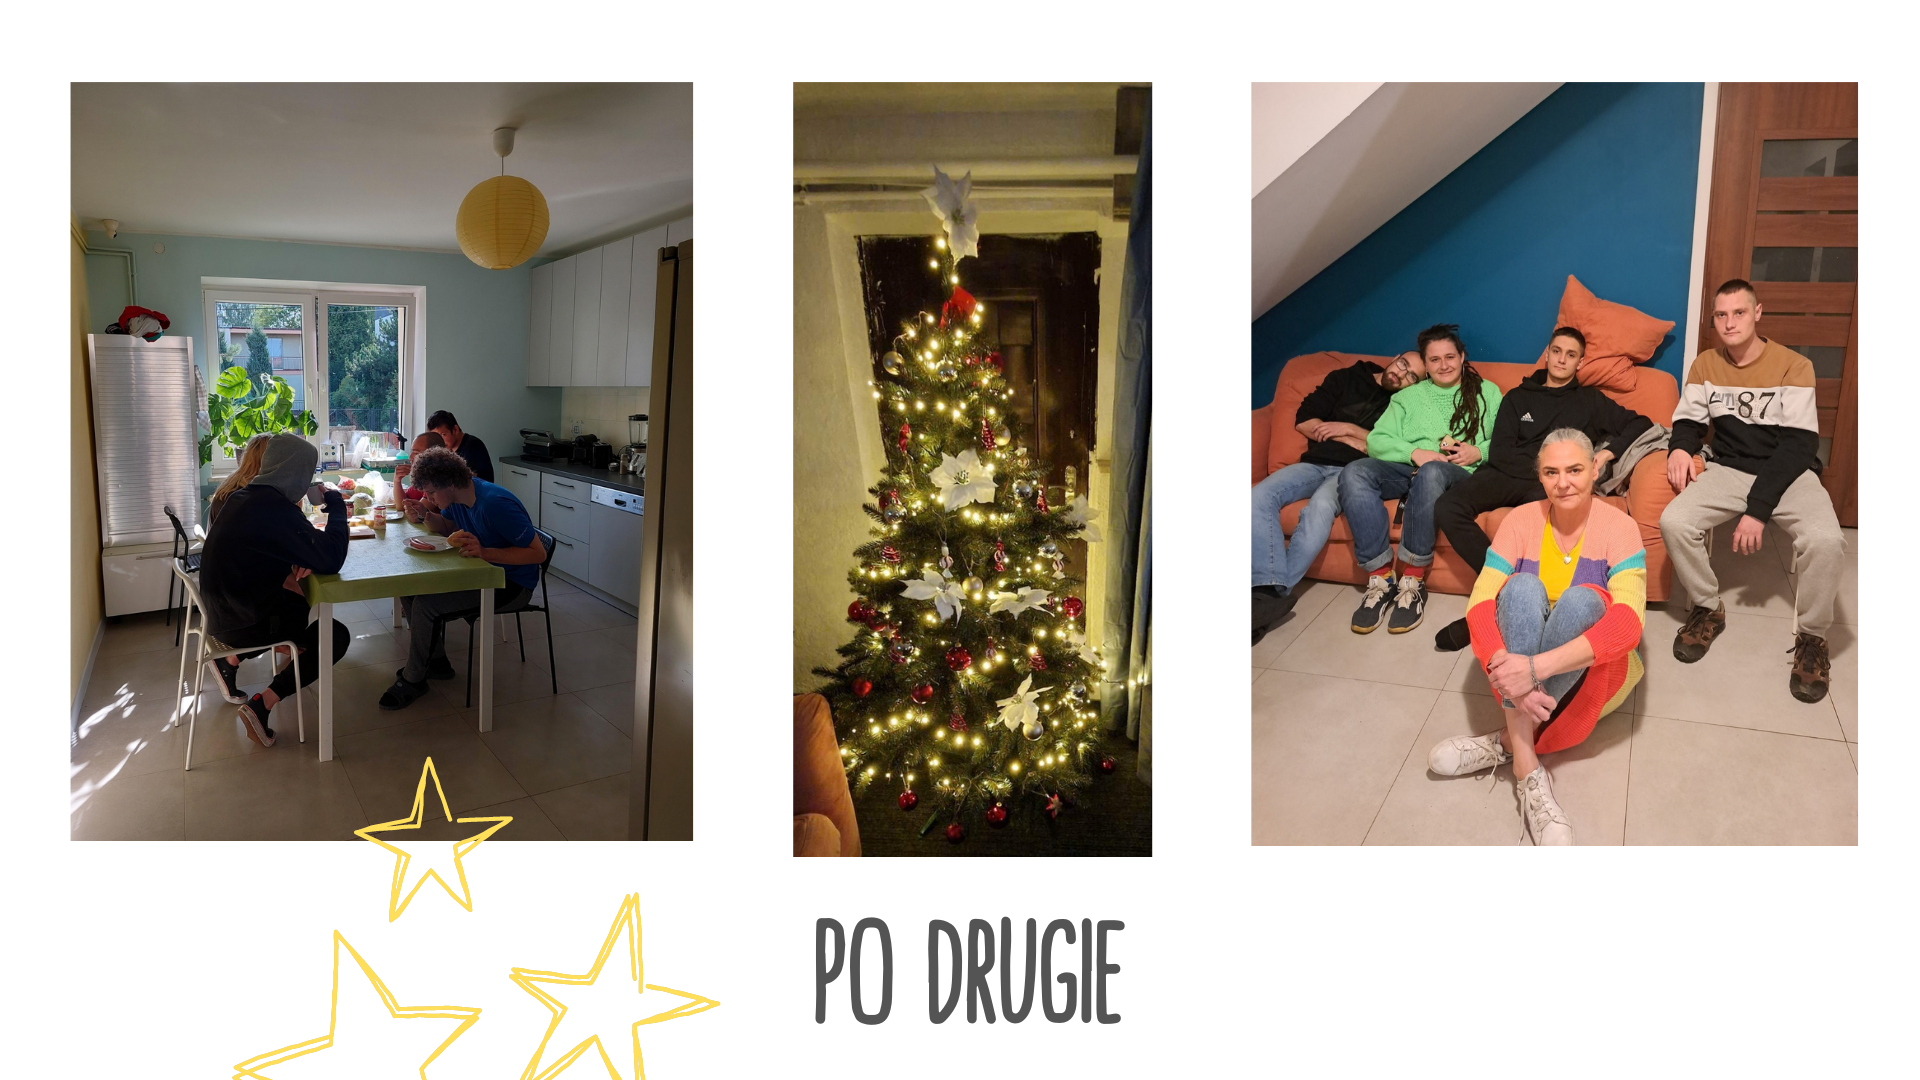 What's new at the "Po drugie" foundation?